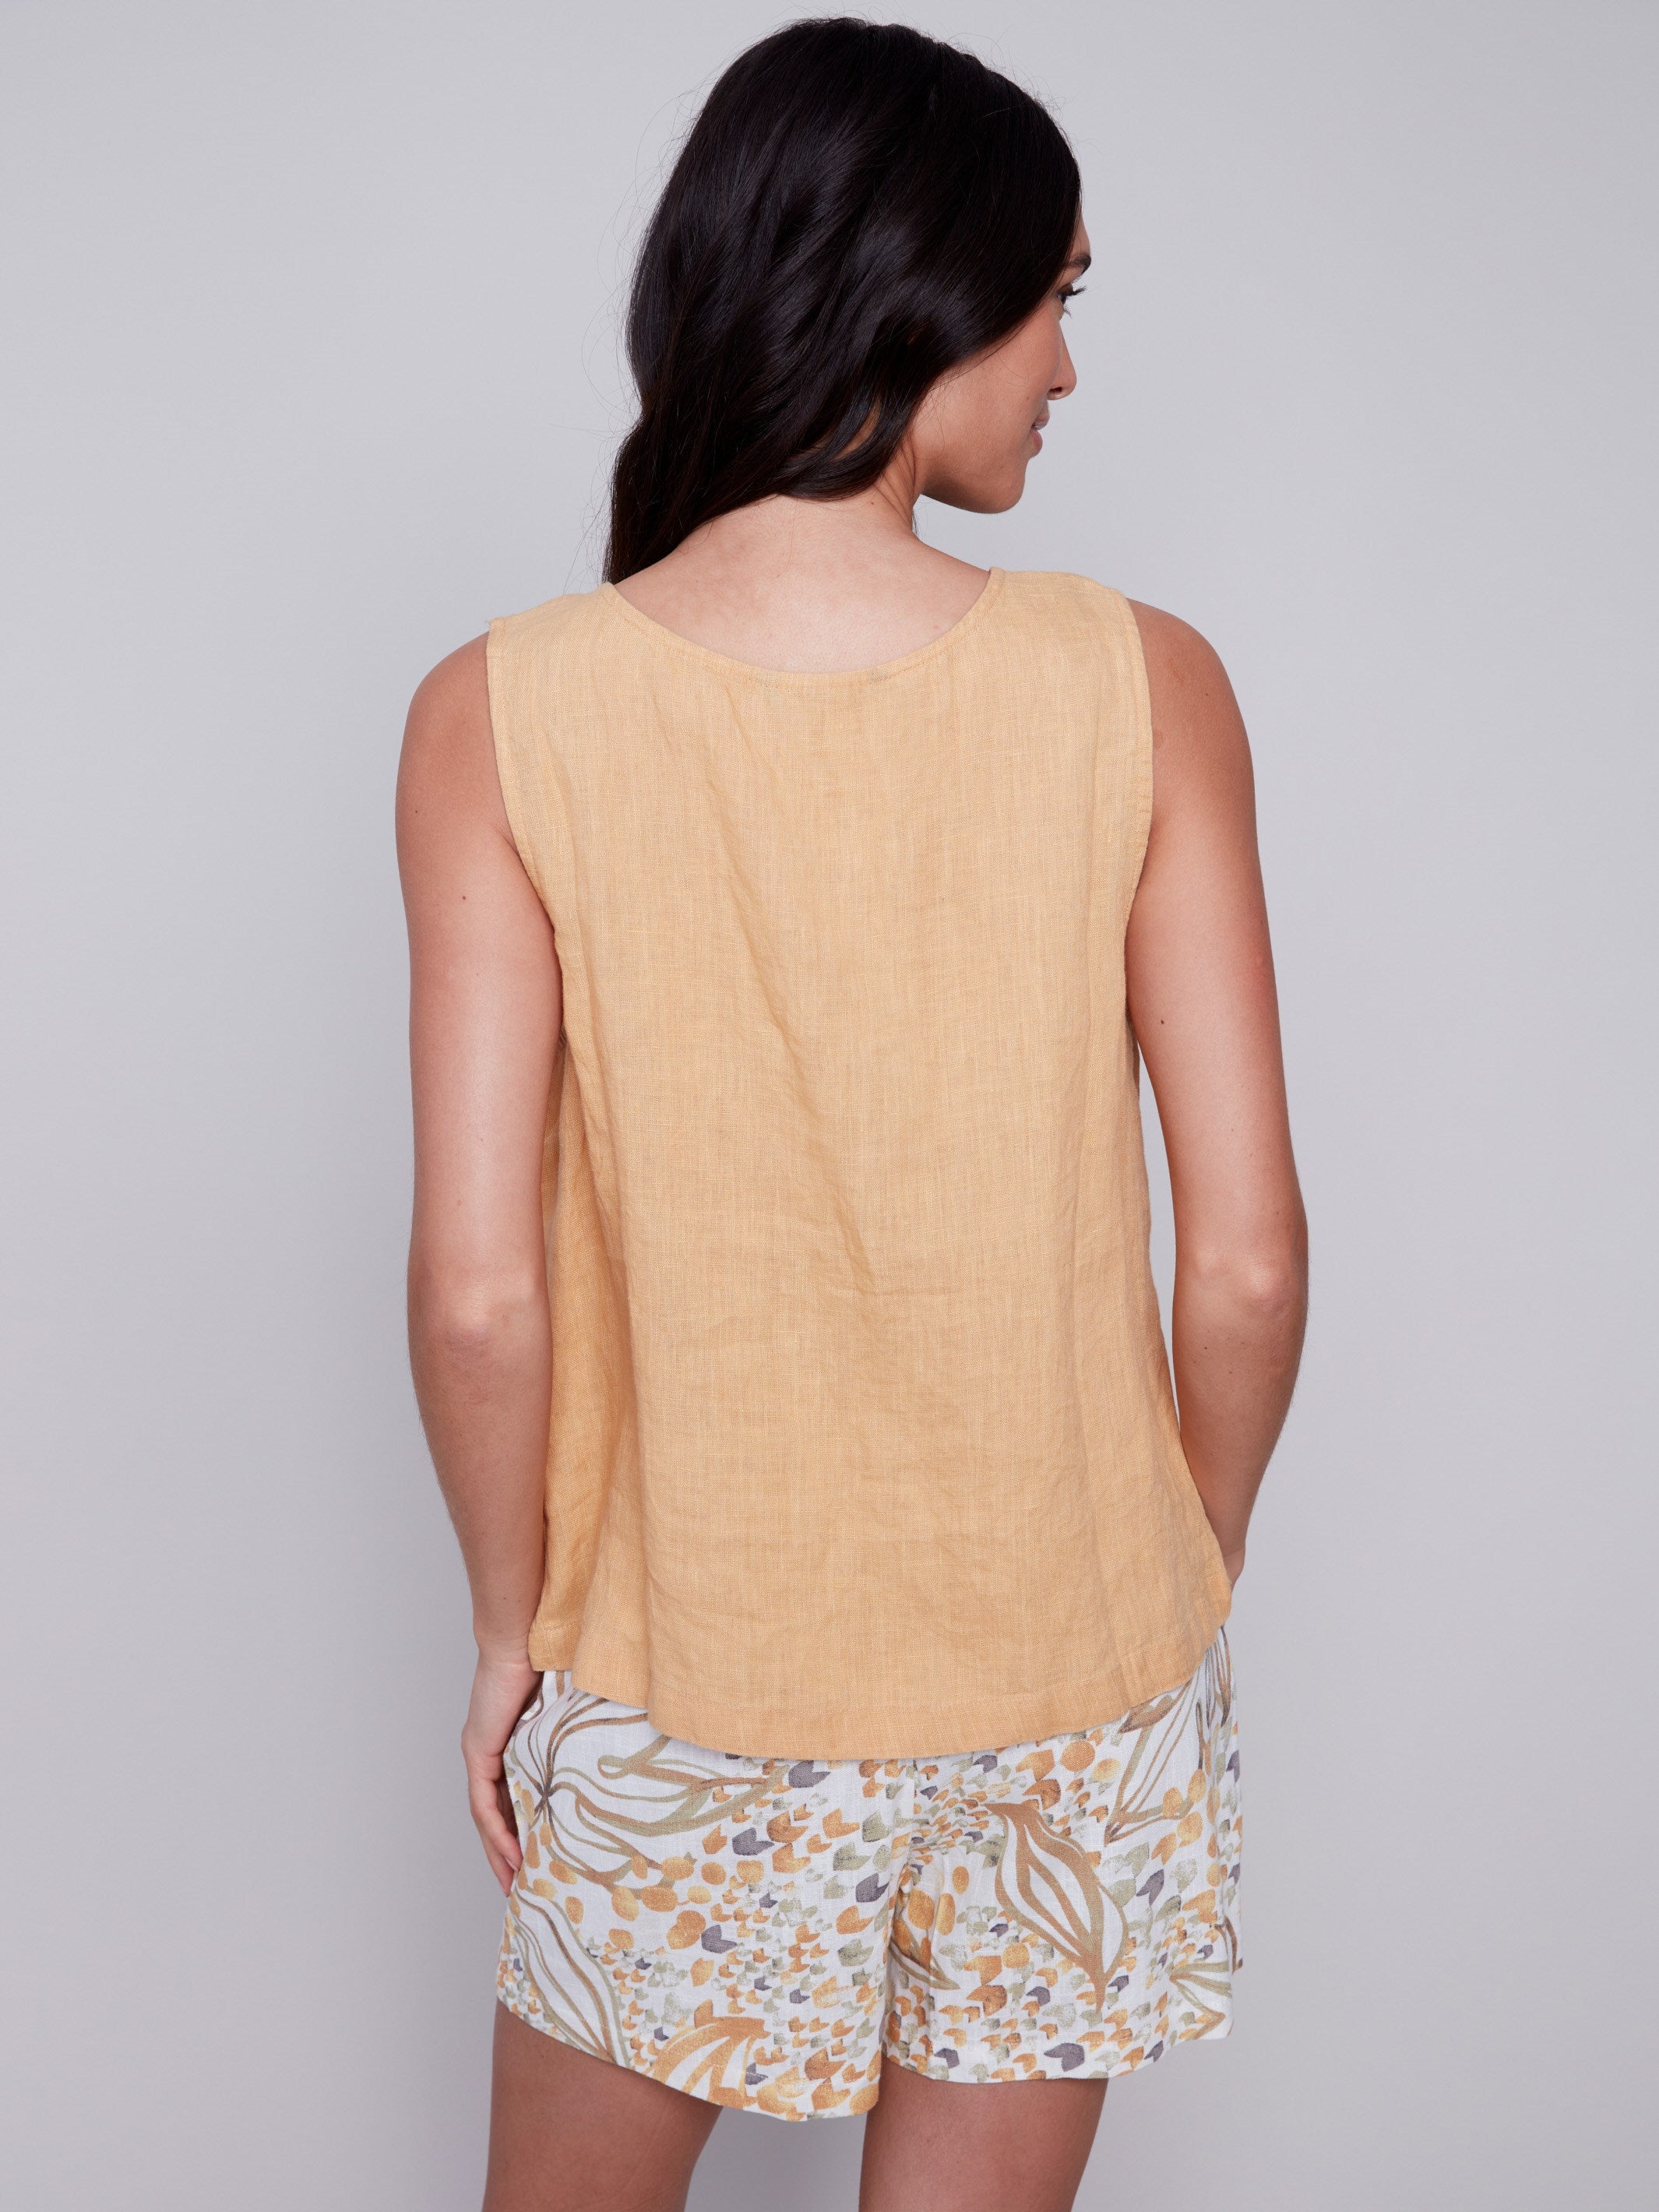 Charlie B Sleeveless Linen Top with Button Detail - Corn - Image 4